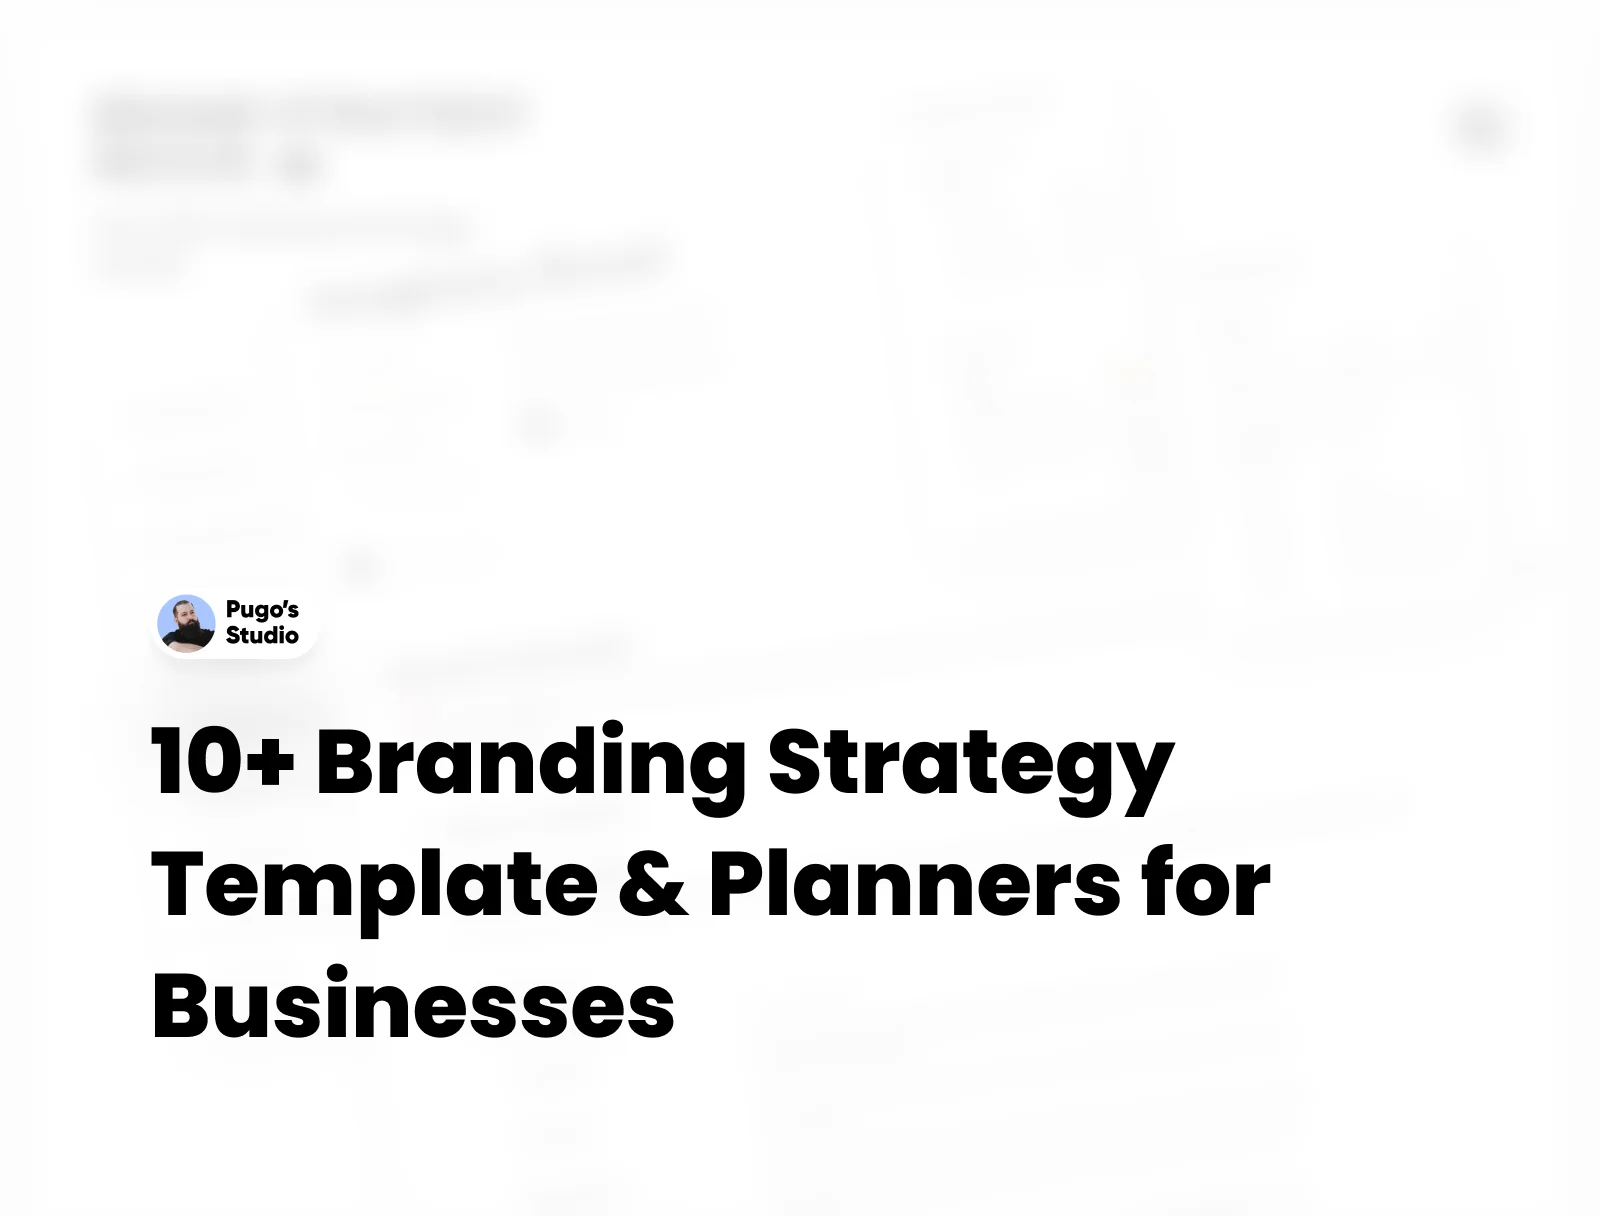 14 Brand Strategy Templates & Planners for Businesses